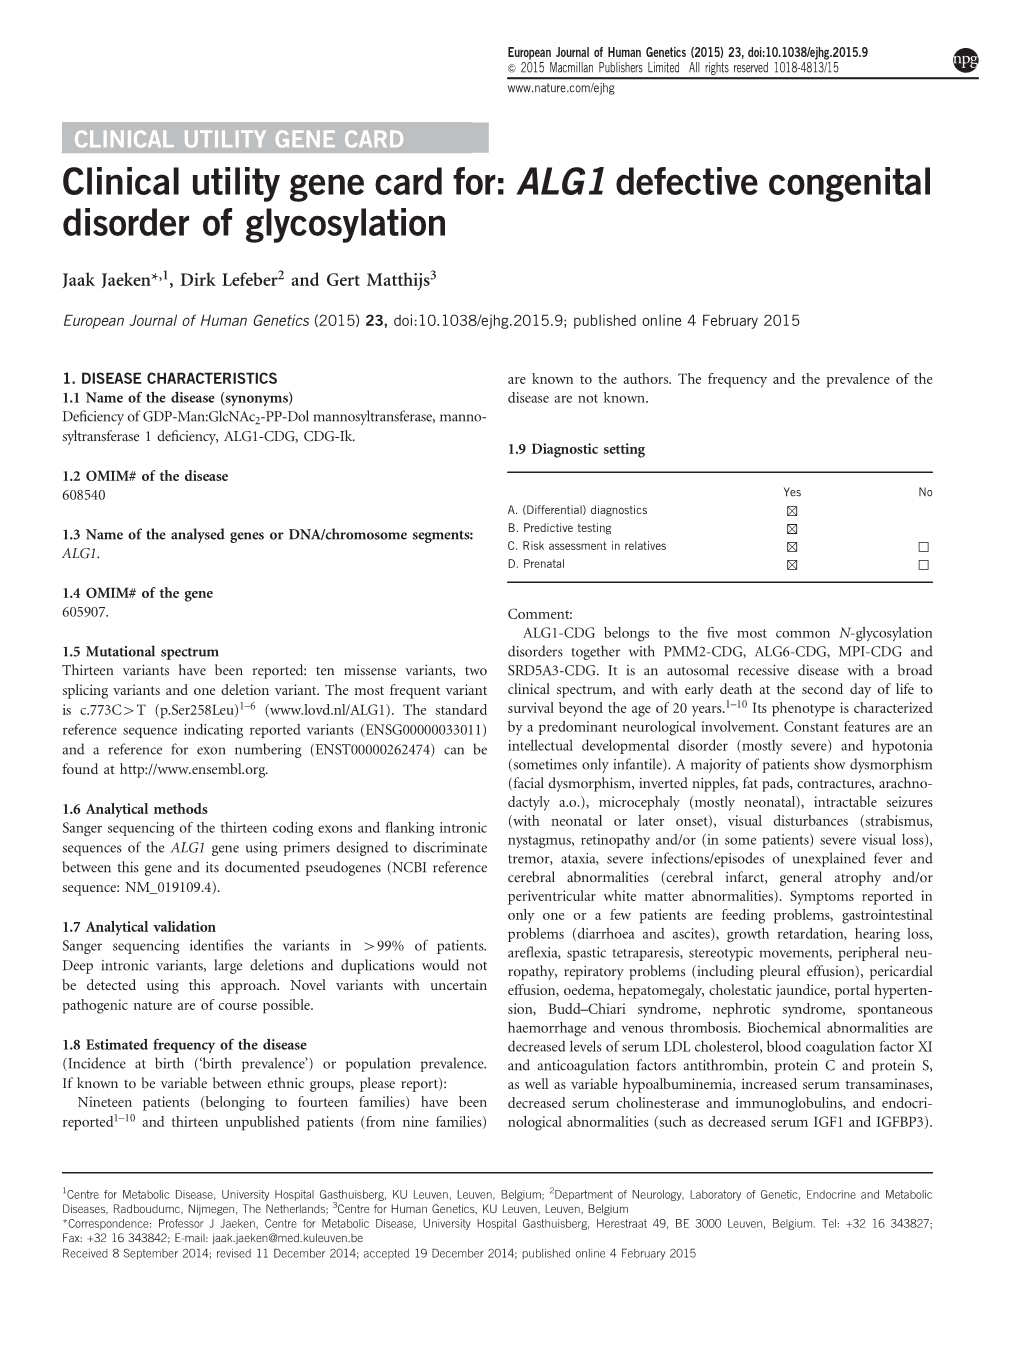 Clinical Utility Gene Card For: ALG1 Defective Congenital Disorder of Glycosylation